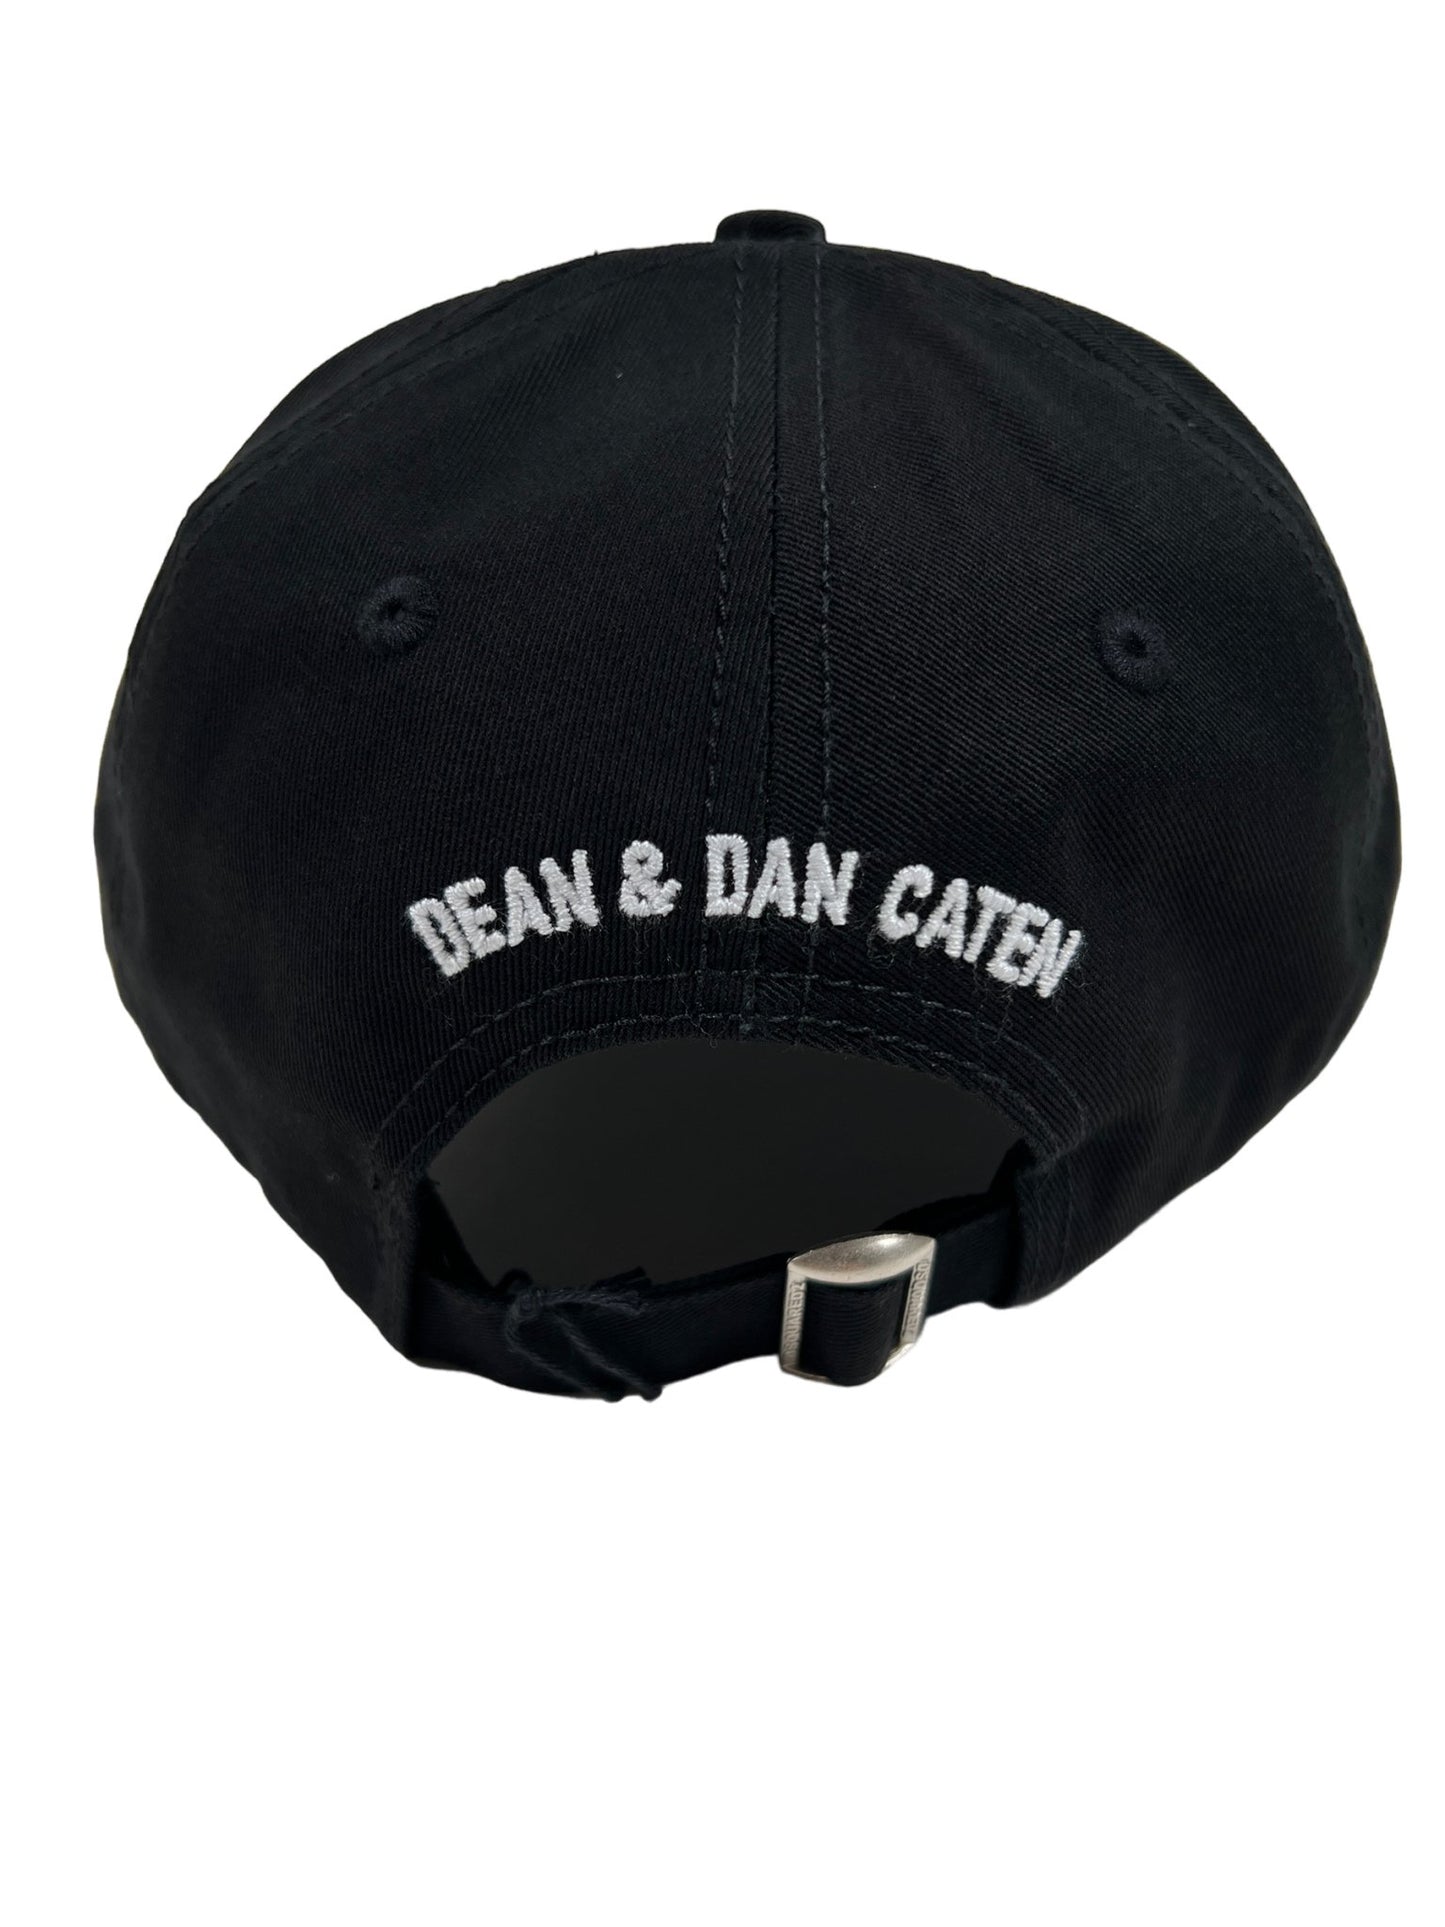 A black DSQUARED2 HAT BCM0714 Logo Baseball Cap with the words 'rean & dan caeder' embroidered on it.